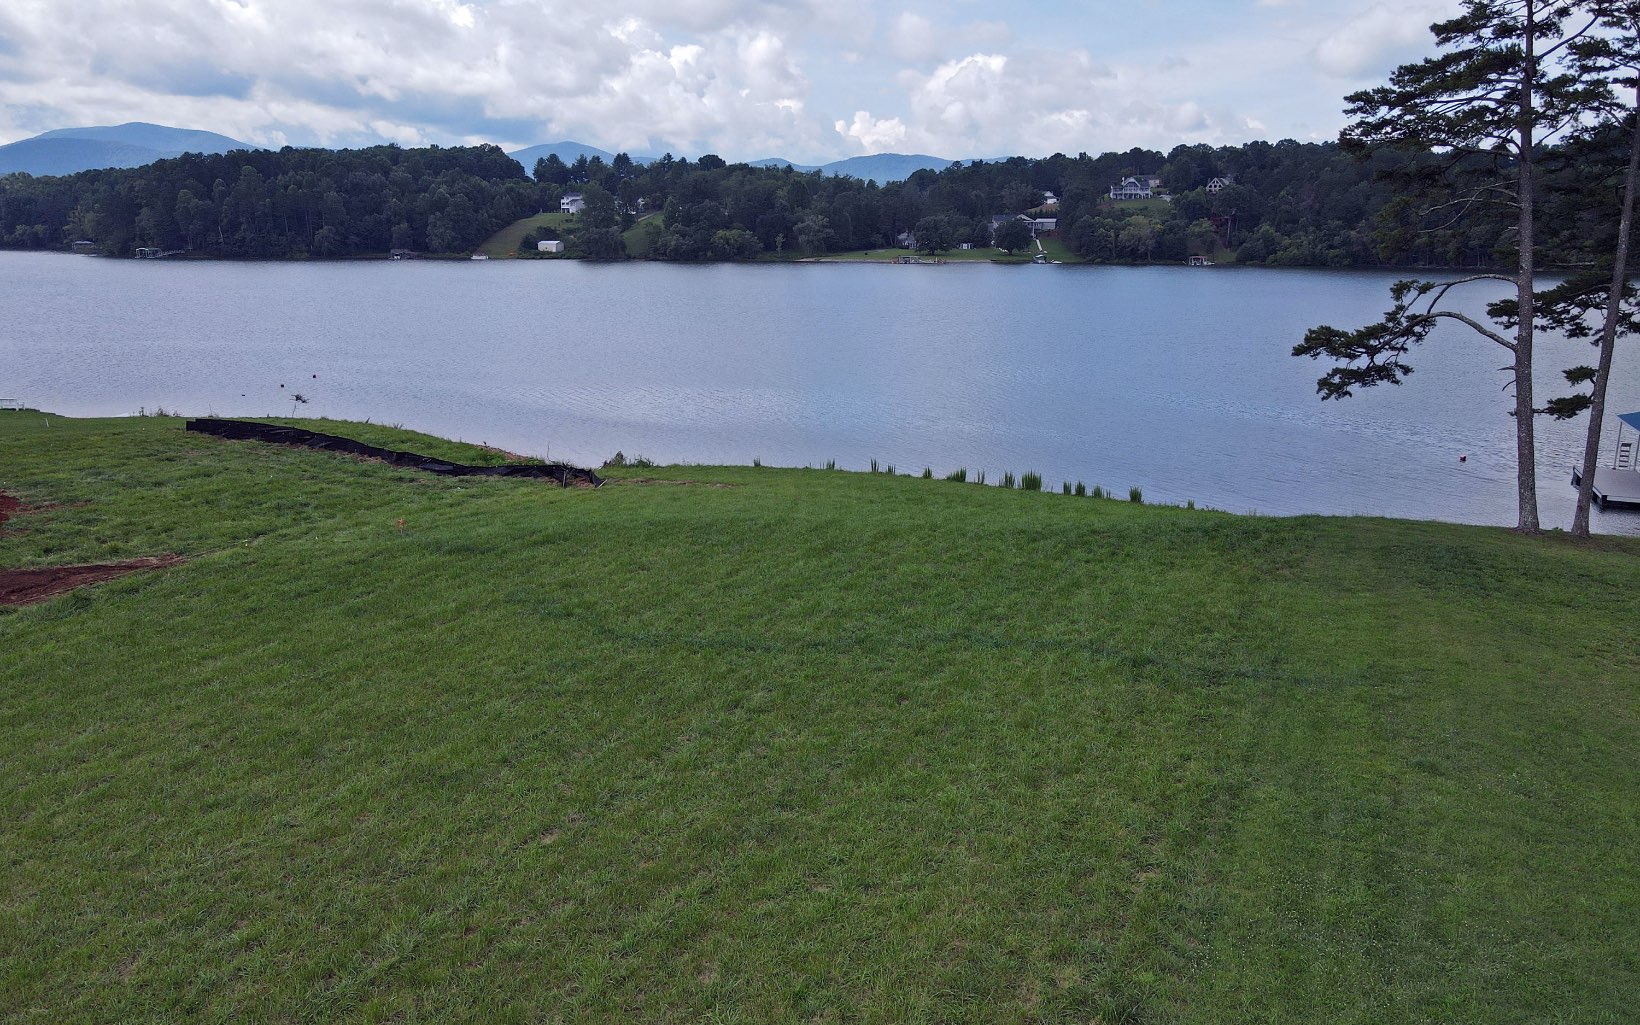 This gorgeous lake lot in the North Georgia Mountains offers year round mountain and lake views. Gated, upscale community in a great area located within three miles of Blairsville, shopping, dining, and schools. Paved roads, underground utilities. Gentle 2 acre lot with very little preparation to build your perfect mountain home. Subdivision offers club house with an infinity pool overlooking Lake Nottley, game room, and marina. Beautiful homes, beautiful views, and a quiet and peaceful community with all the amenities of city living.